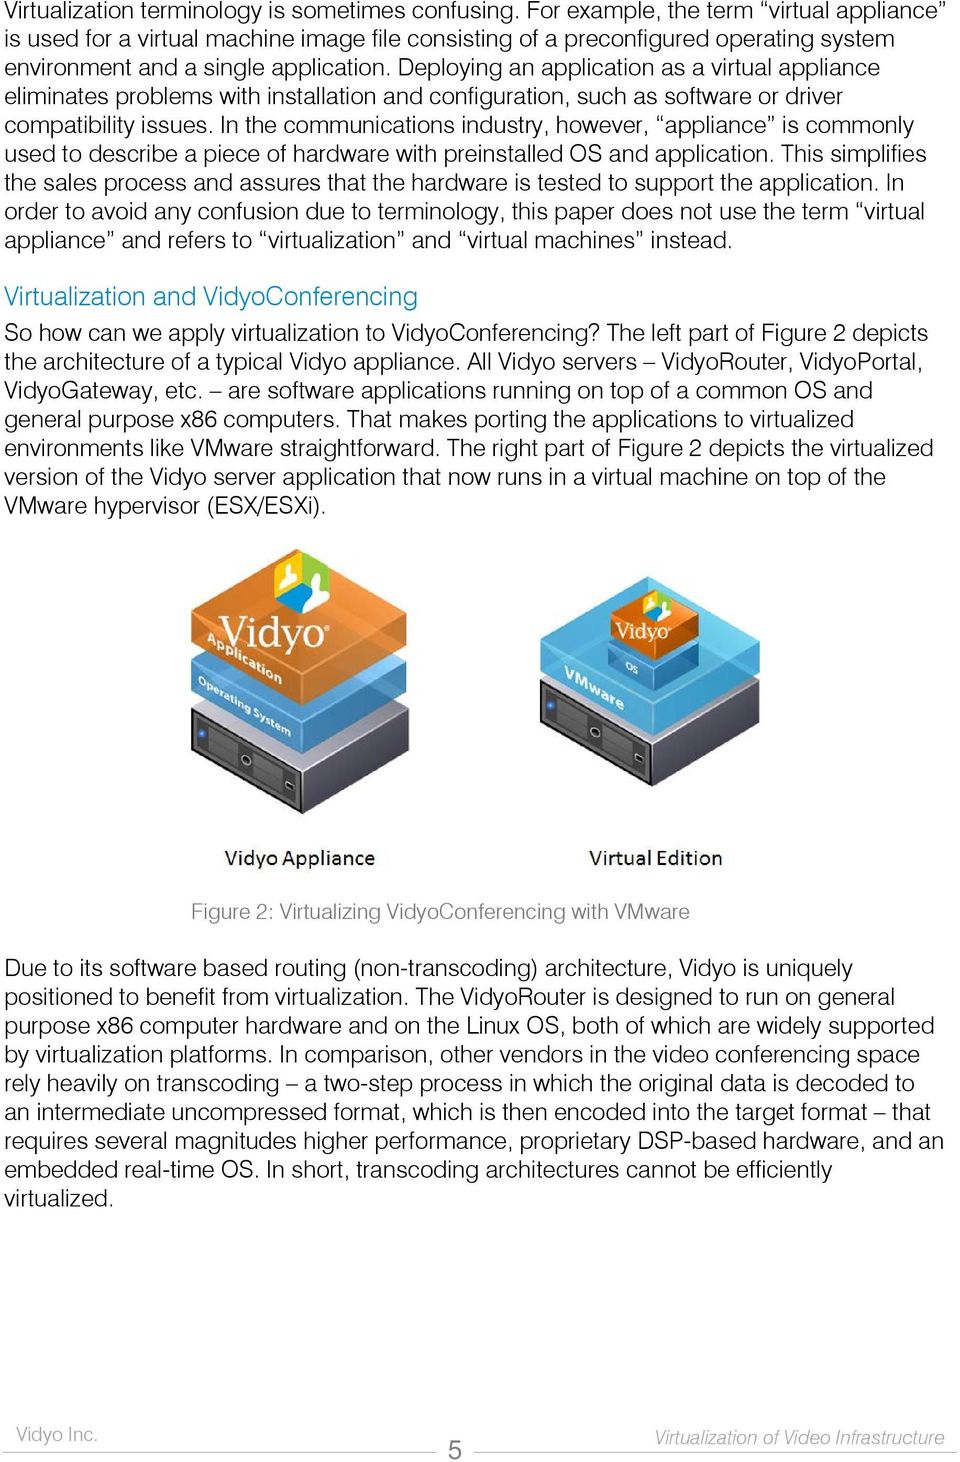 Deploying an application as a virtual appliance eliminates problems with installation and configuration, such as software or driver compatibility issues.